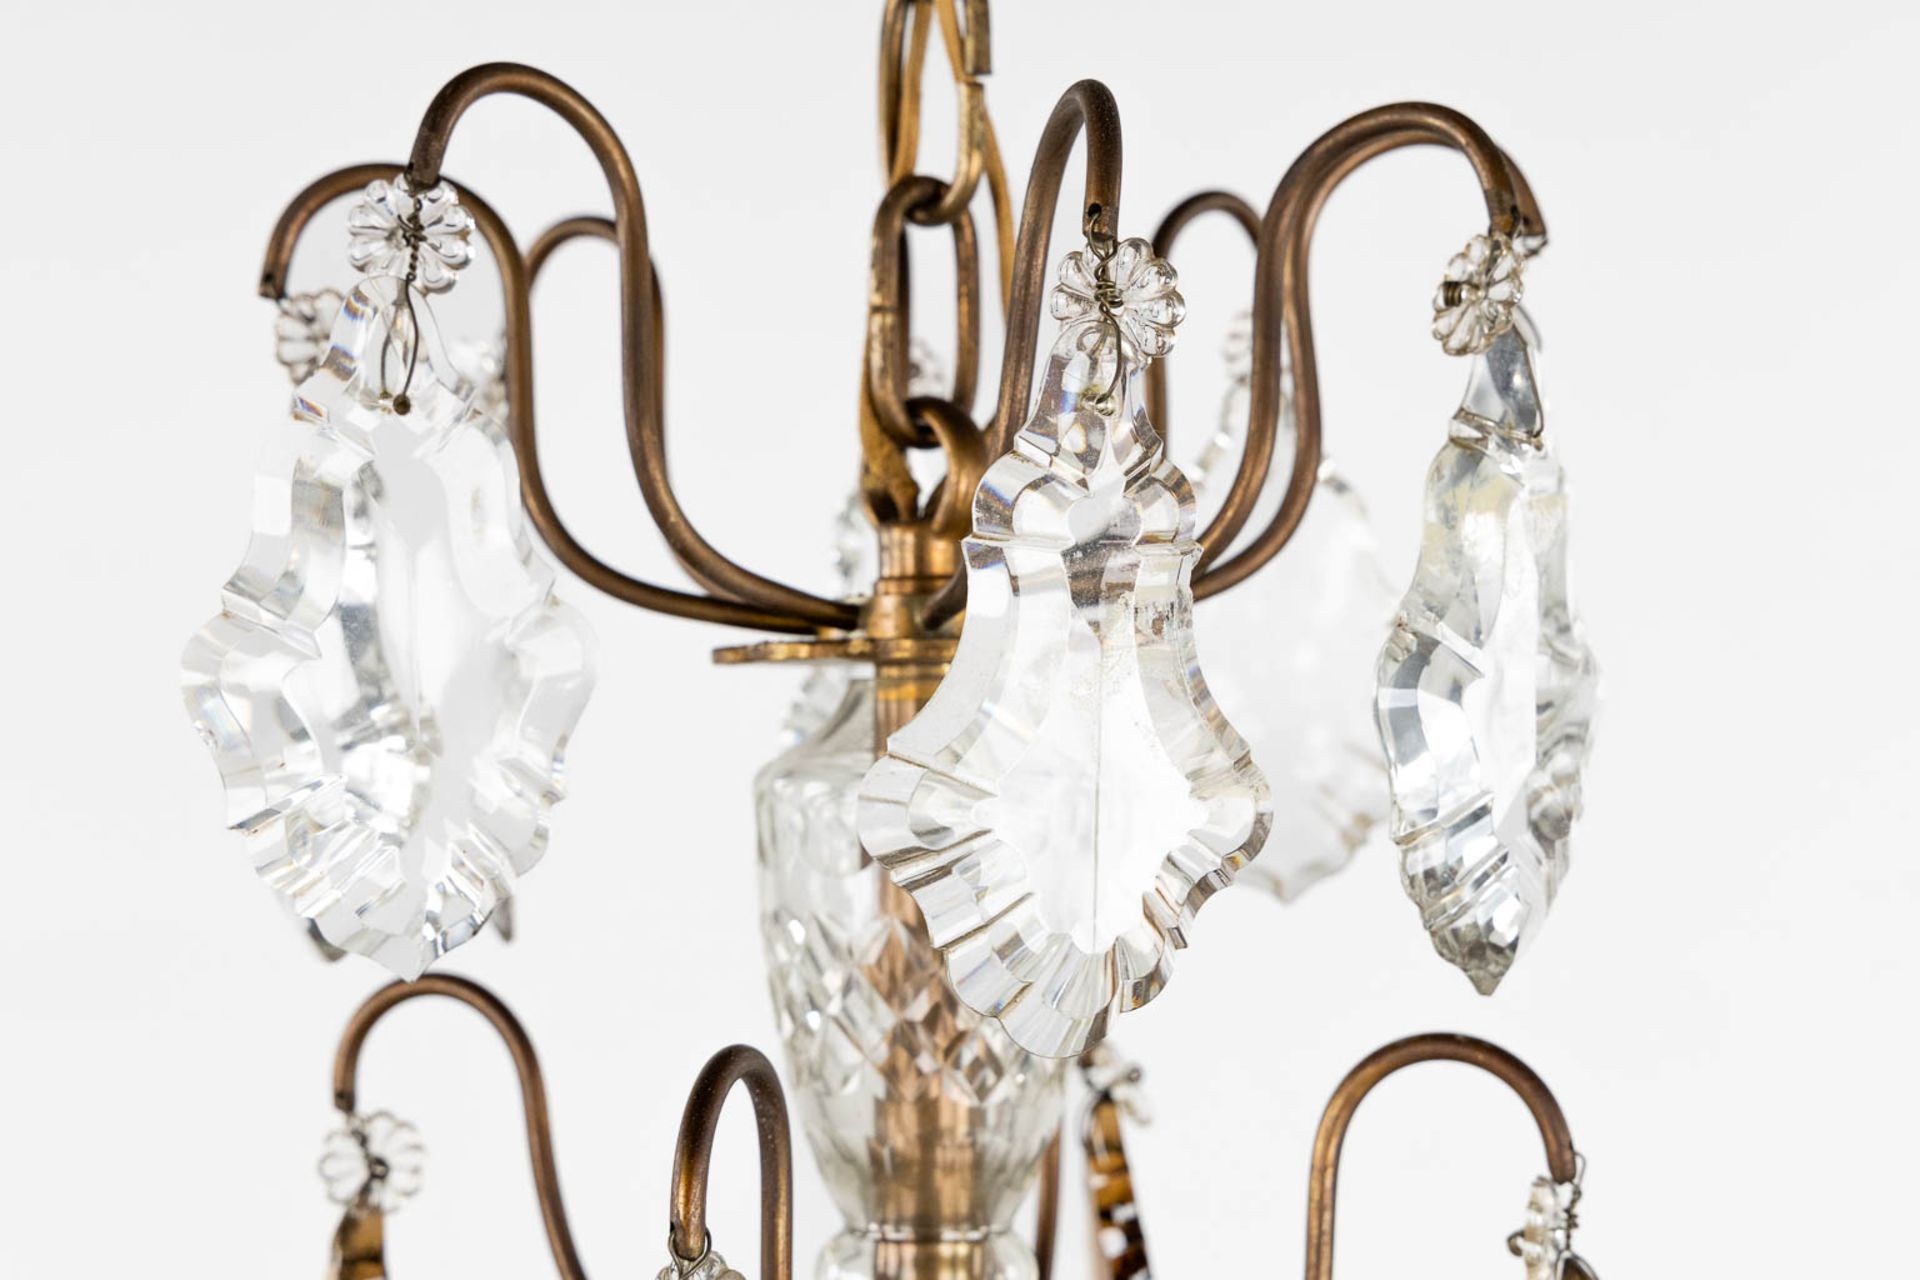 An antique chandelier, brass with coloured and white glass. Circa 1930. (H:80 x D:68 cm) - Image 4 of 11